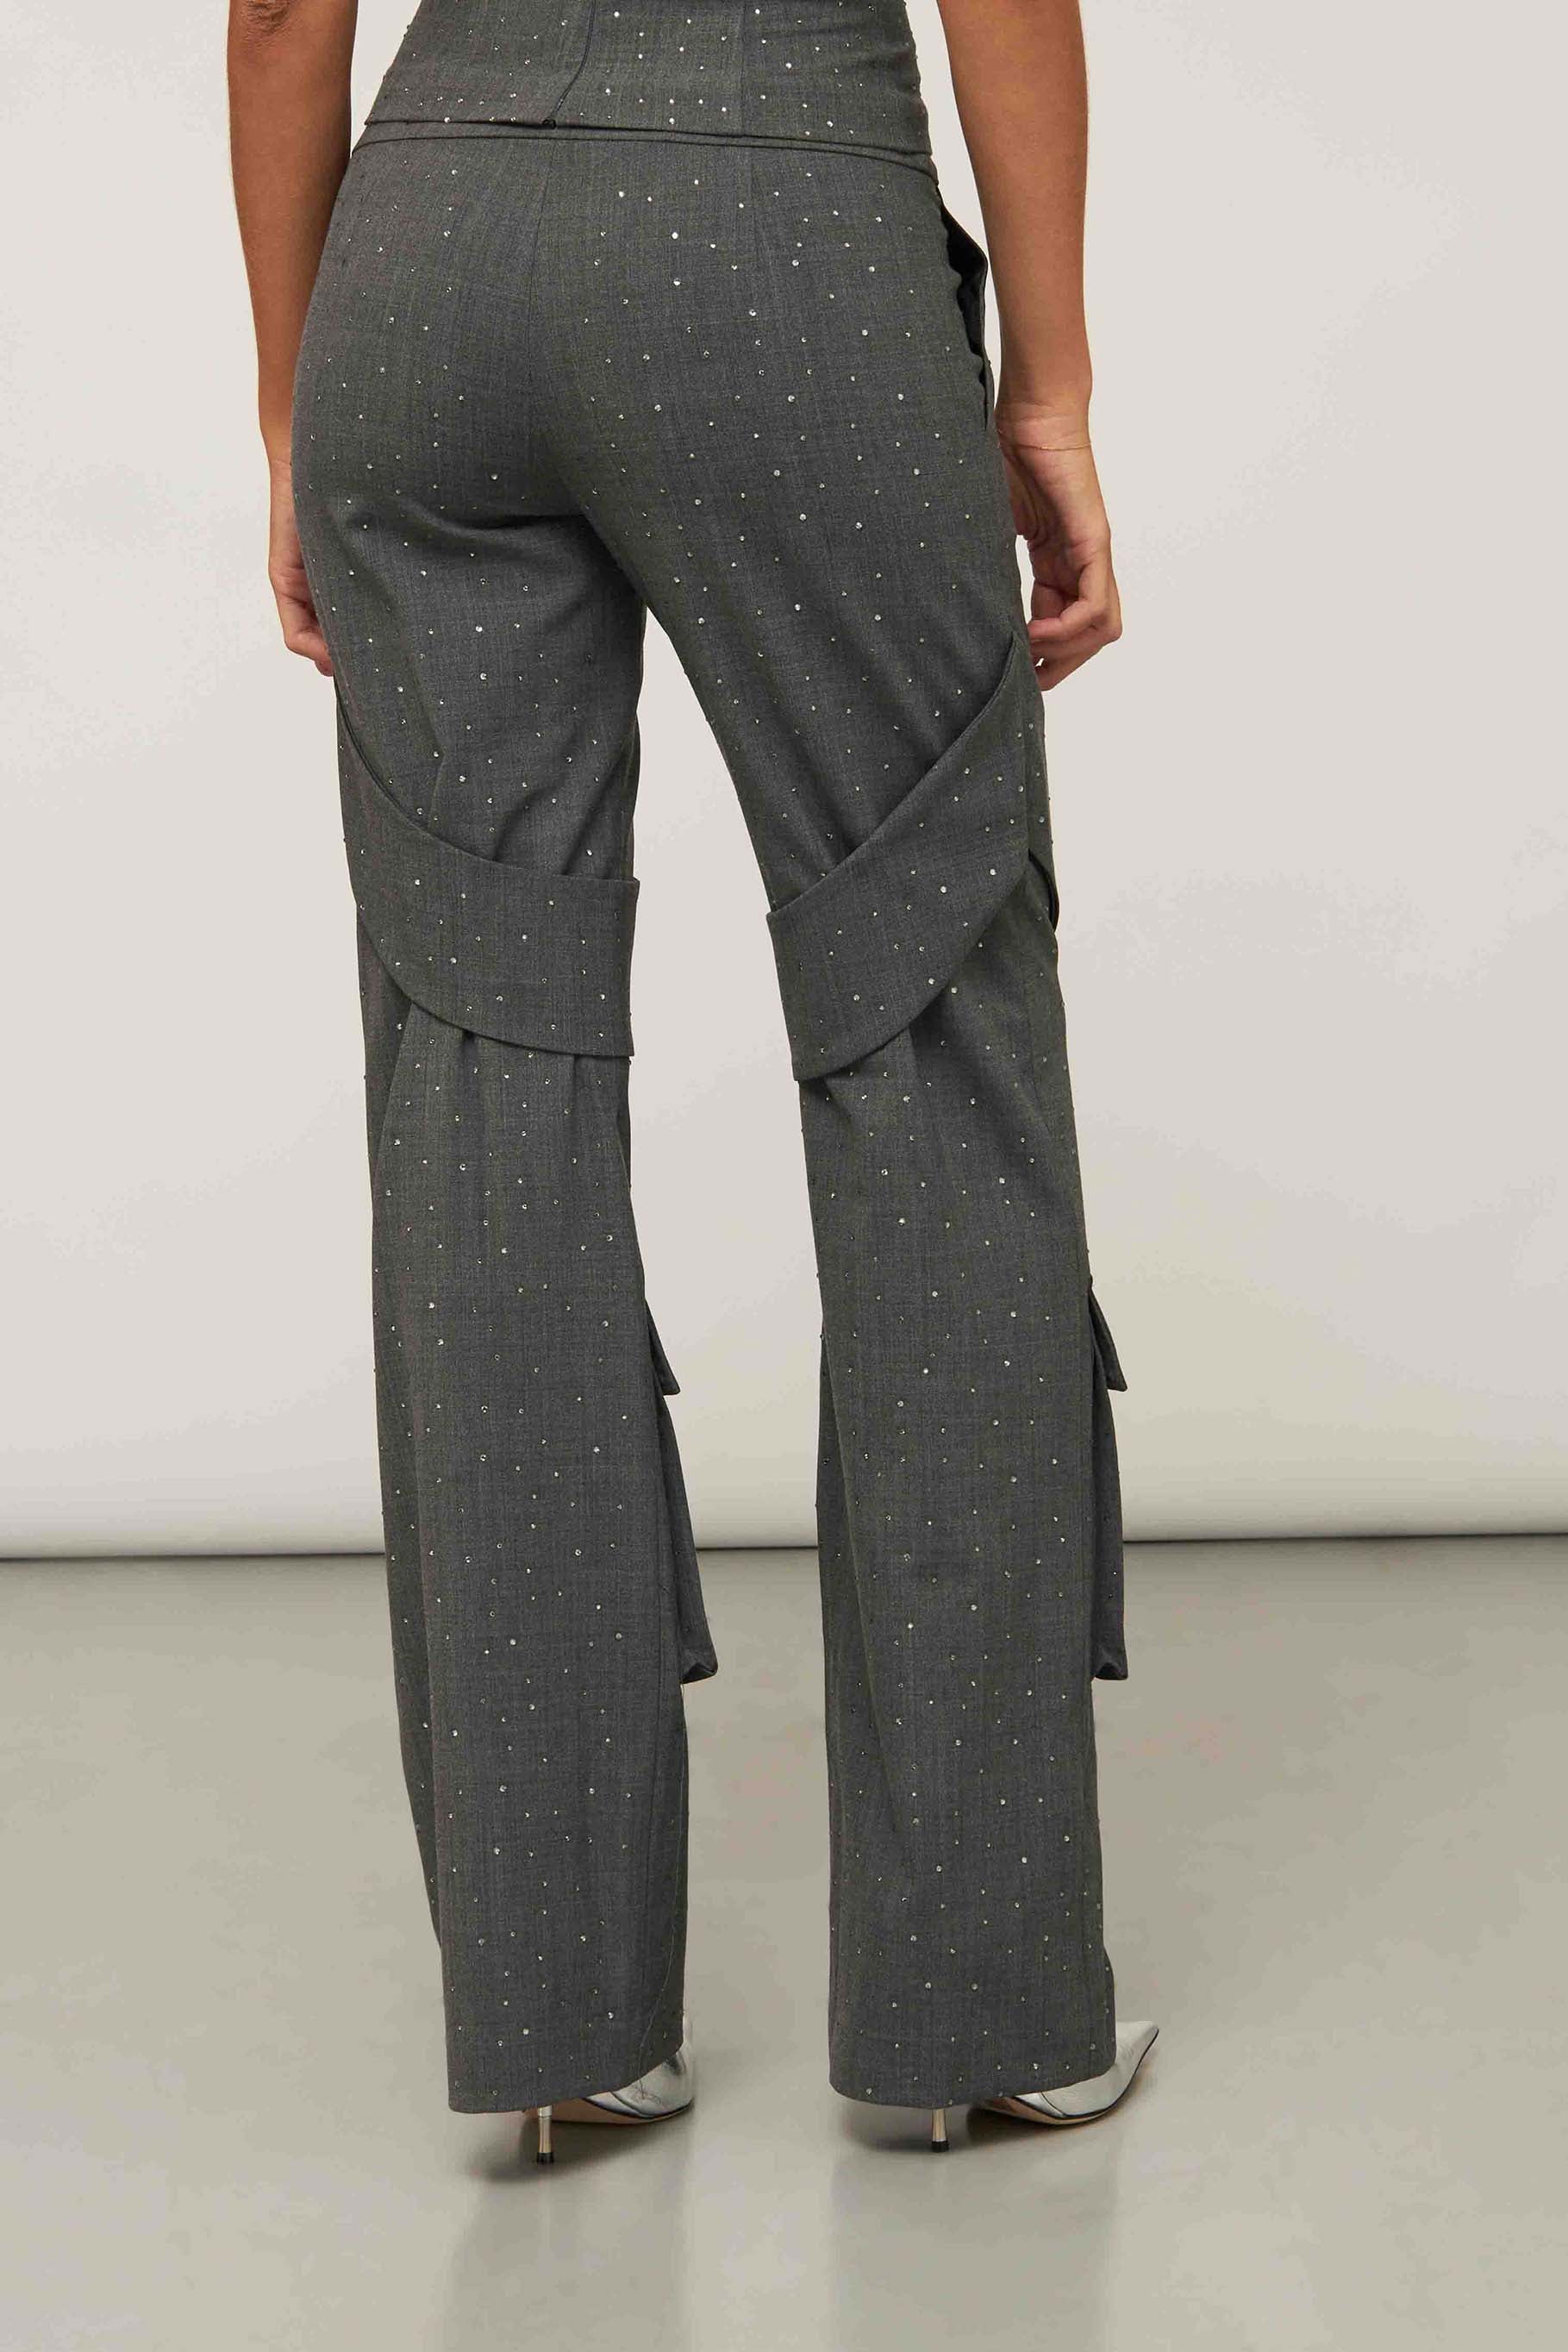 Blumarine x Modes Exclusive Capsule Low-Waisted Pants